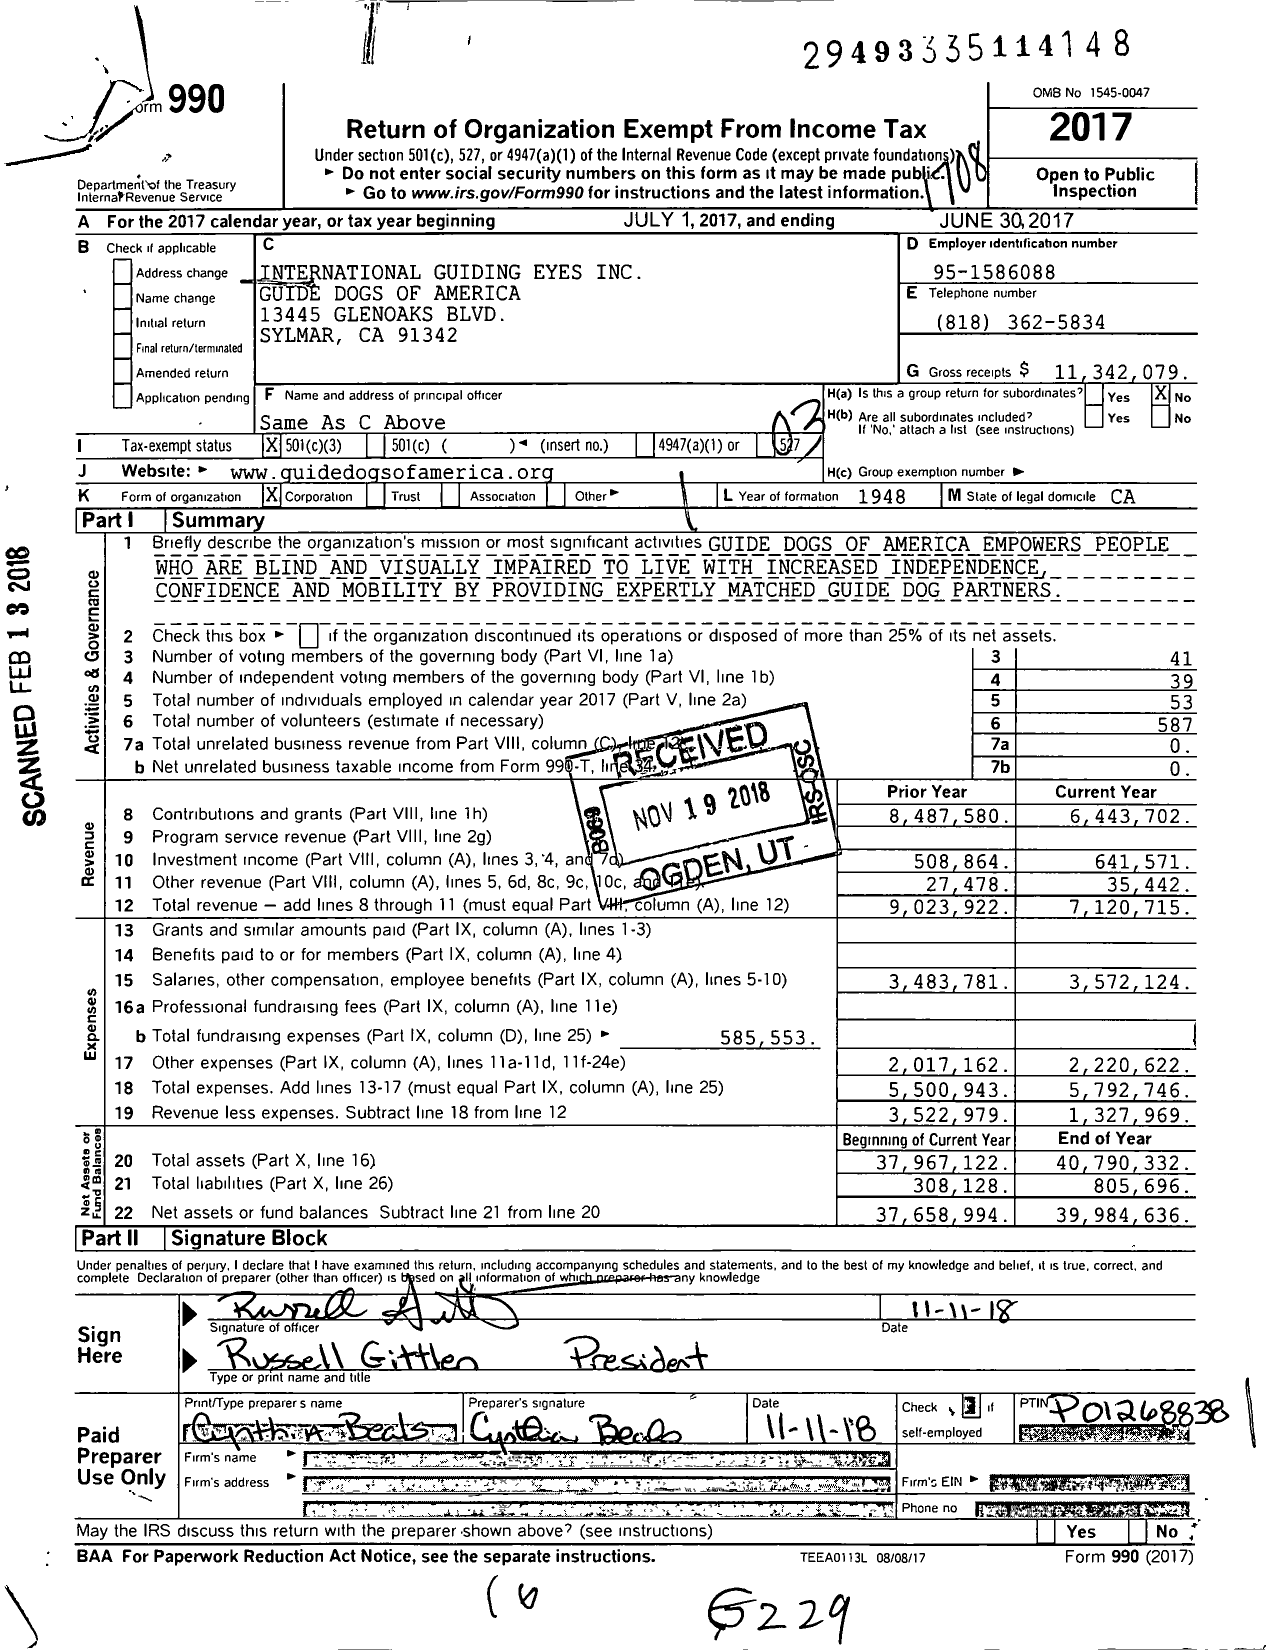 Image of first page of 2016 Form 990 for Guide Dogs of America